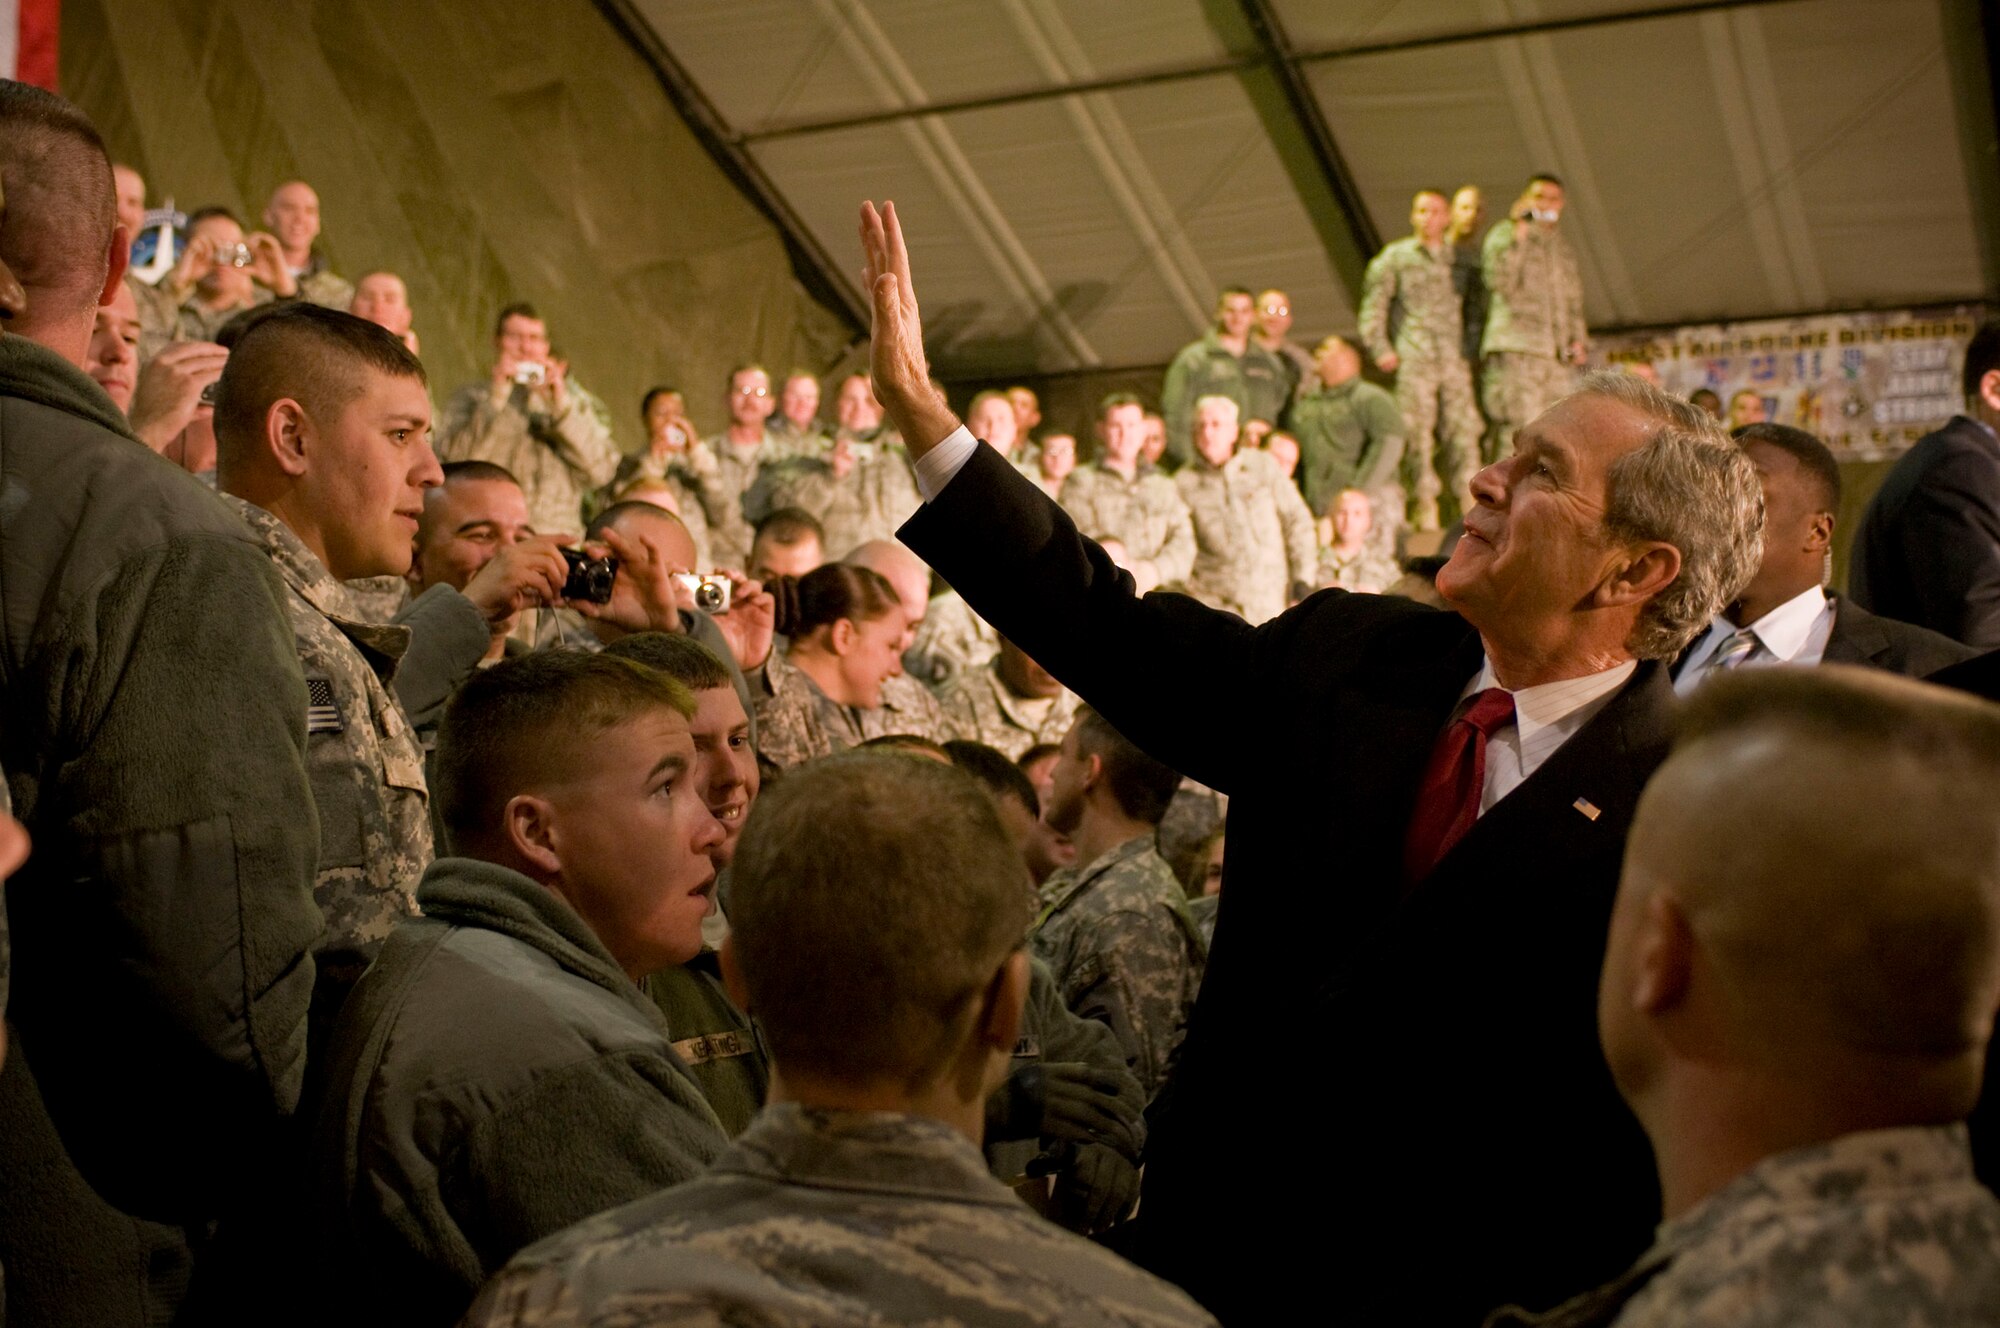 President George W. Bush waves to military members at Bagram Air Field, Afghanistan, Dec. 15. After giving his speech, he took time to shake hands and individually thank troops for their service. (U.S. Air Force photo by Staff Sgt. Samuel Morse)(Released)